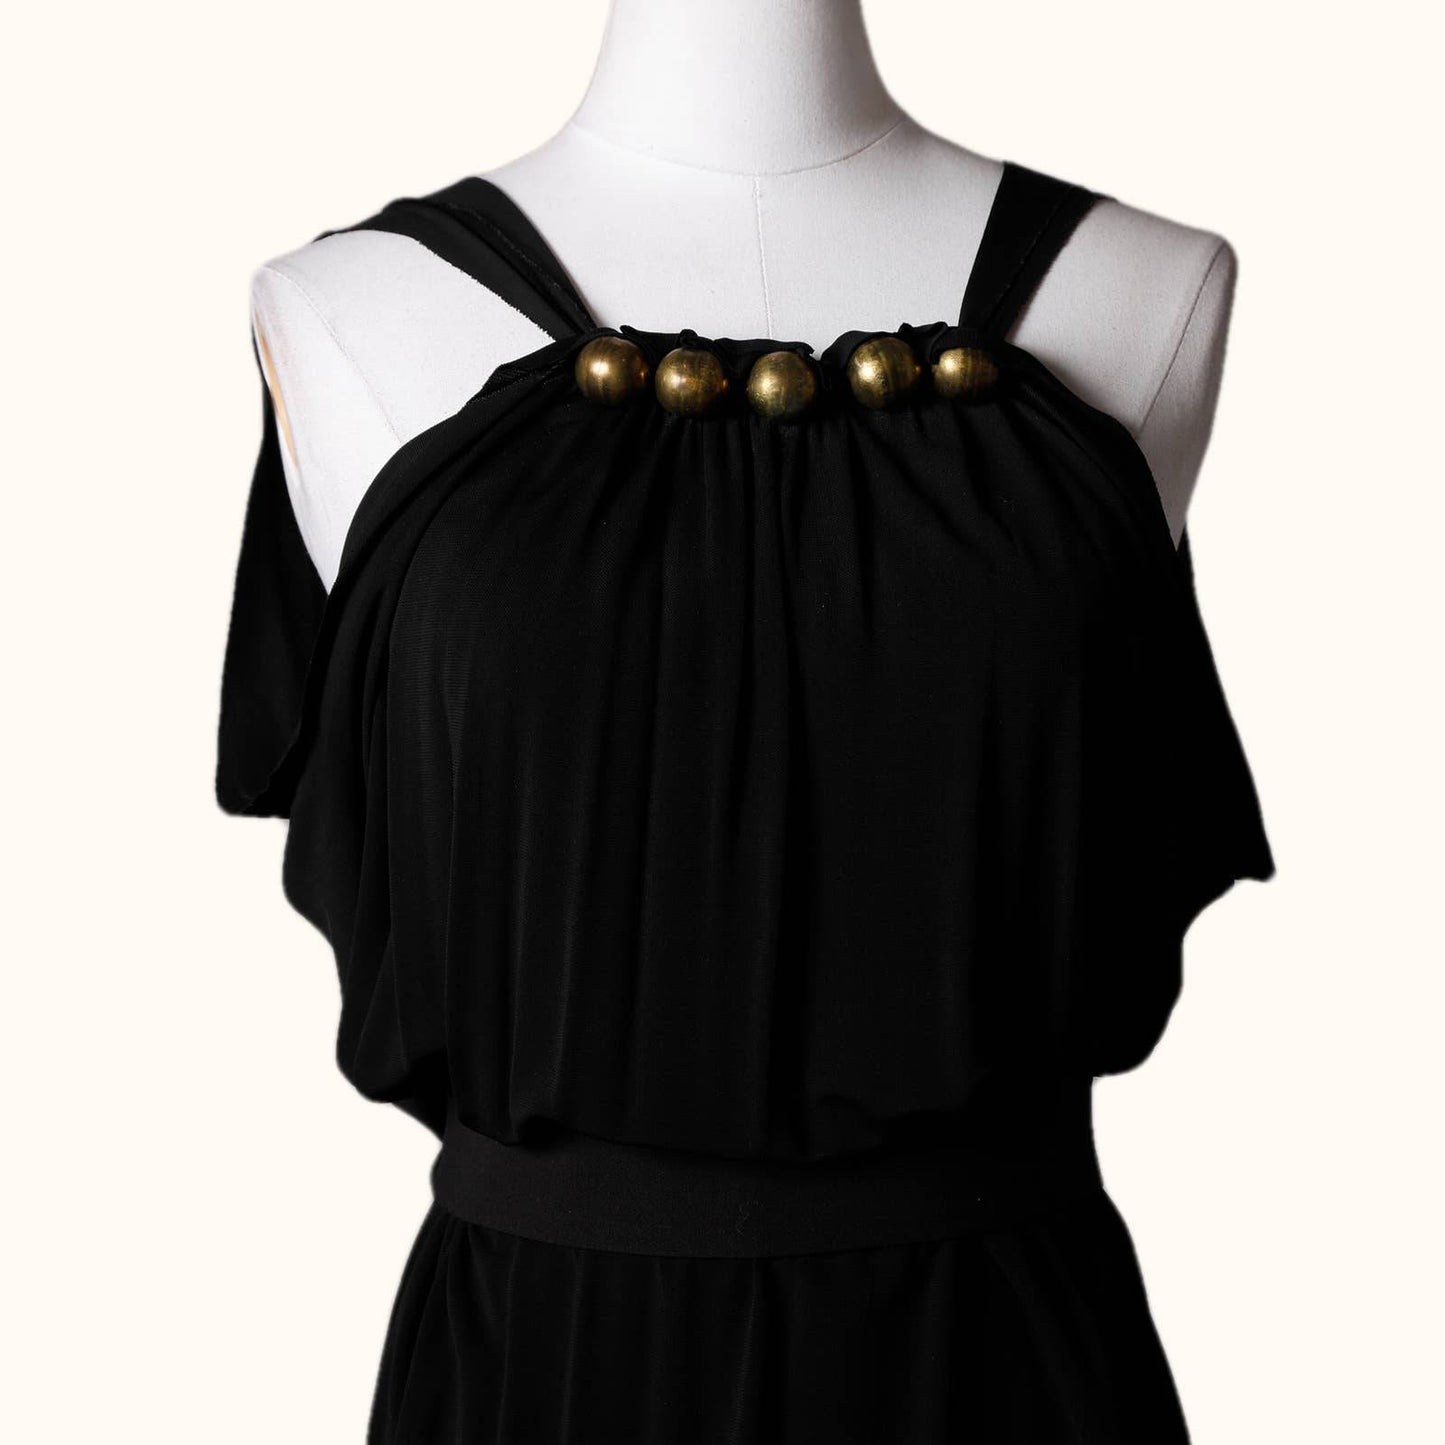 YIGAL AZROUEL Black Dress with Gold Bead Embellished Neckline